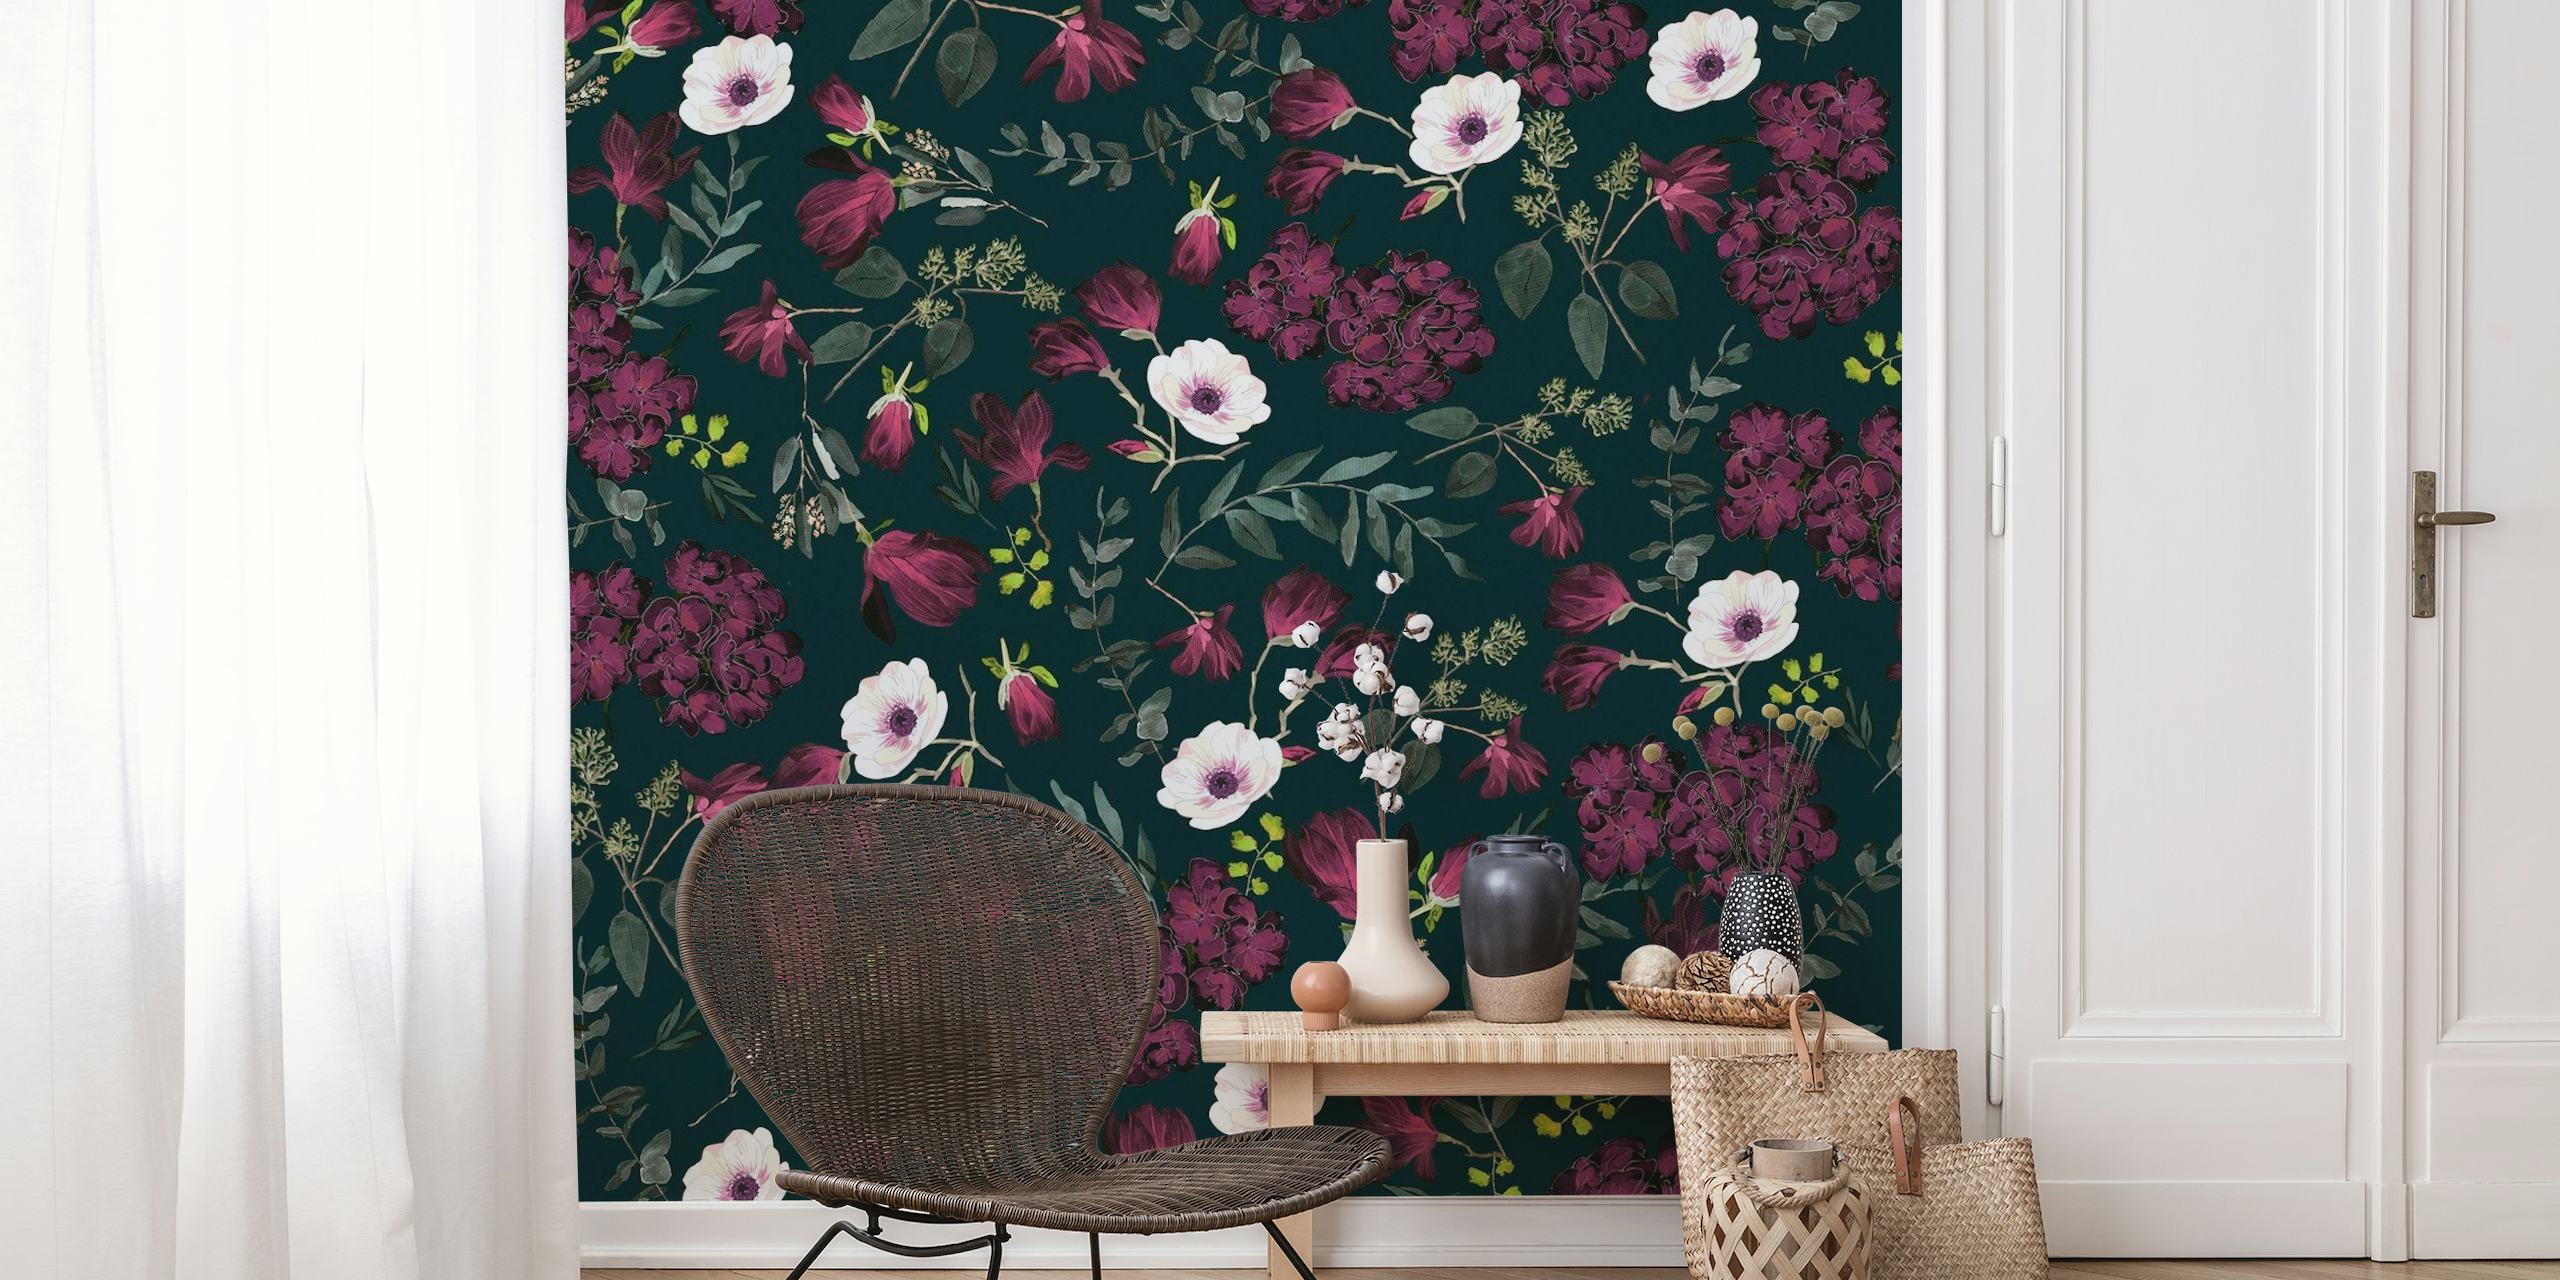 Dark floral romantic pattern with burgundy and fuchsia flowers, ideal for sophisticated wall decor.